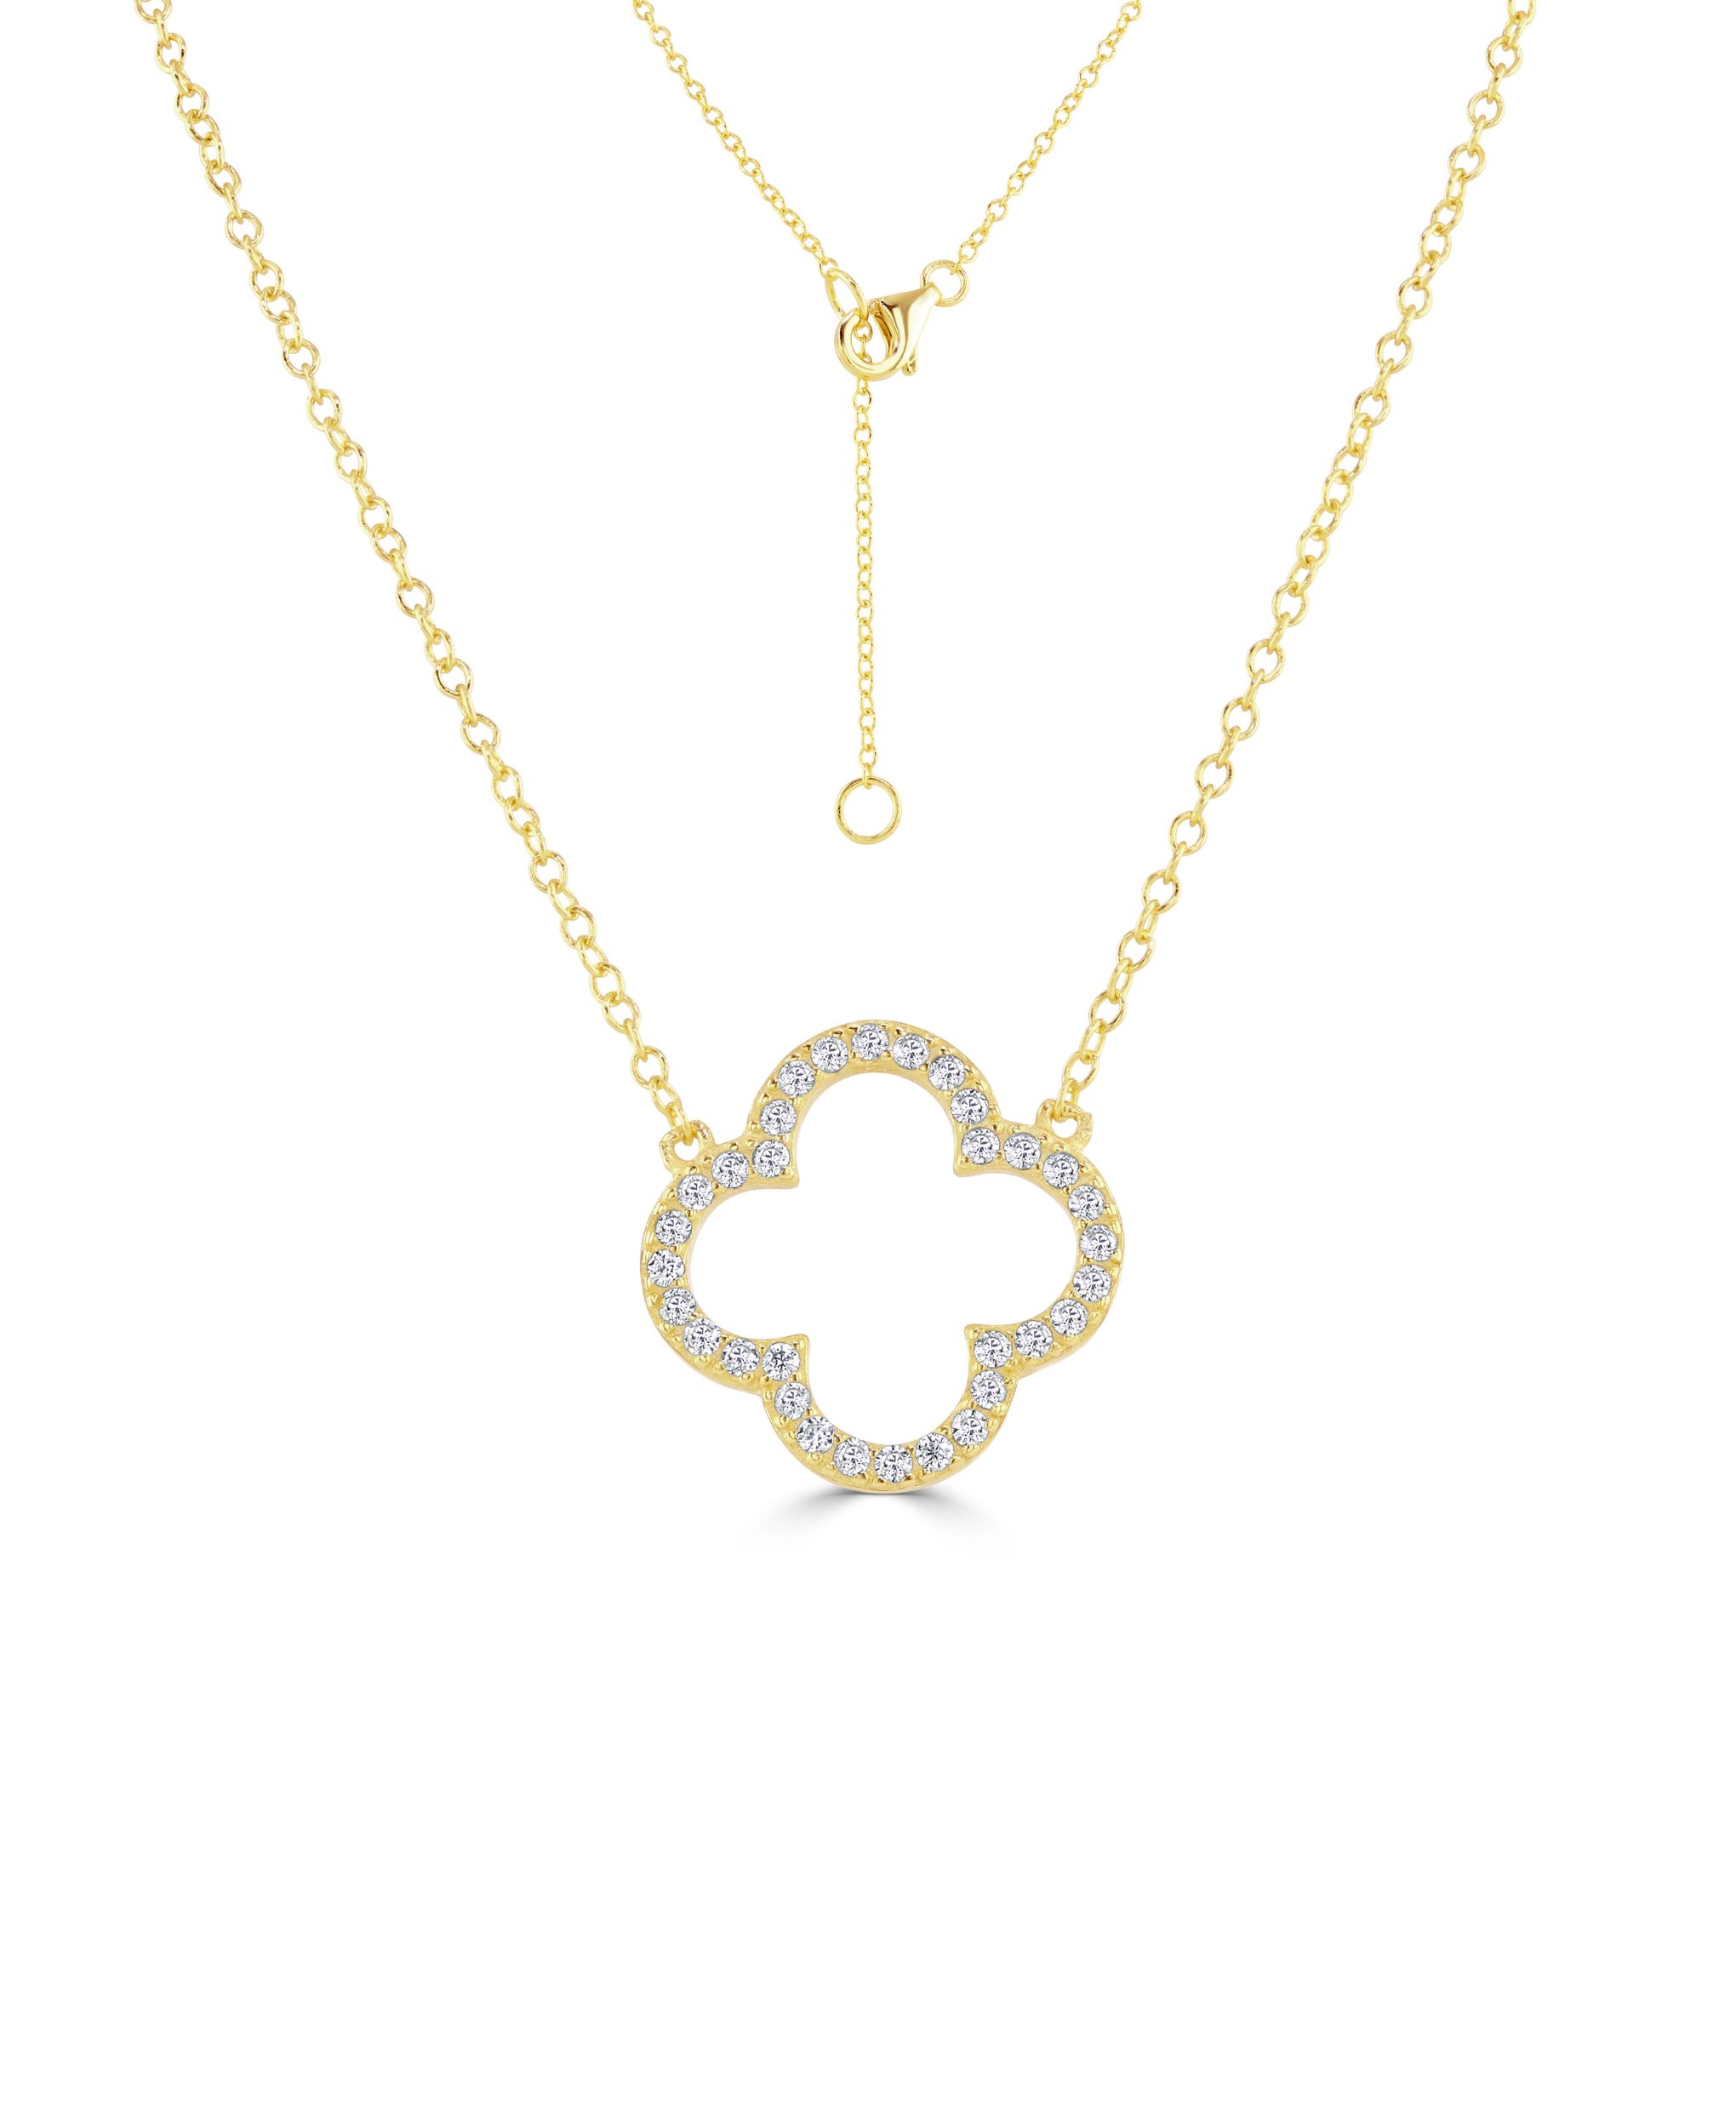 Gold Clover Necklace with Cubic Zirconia